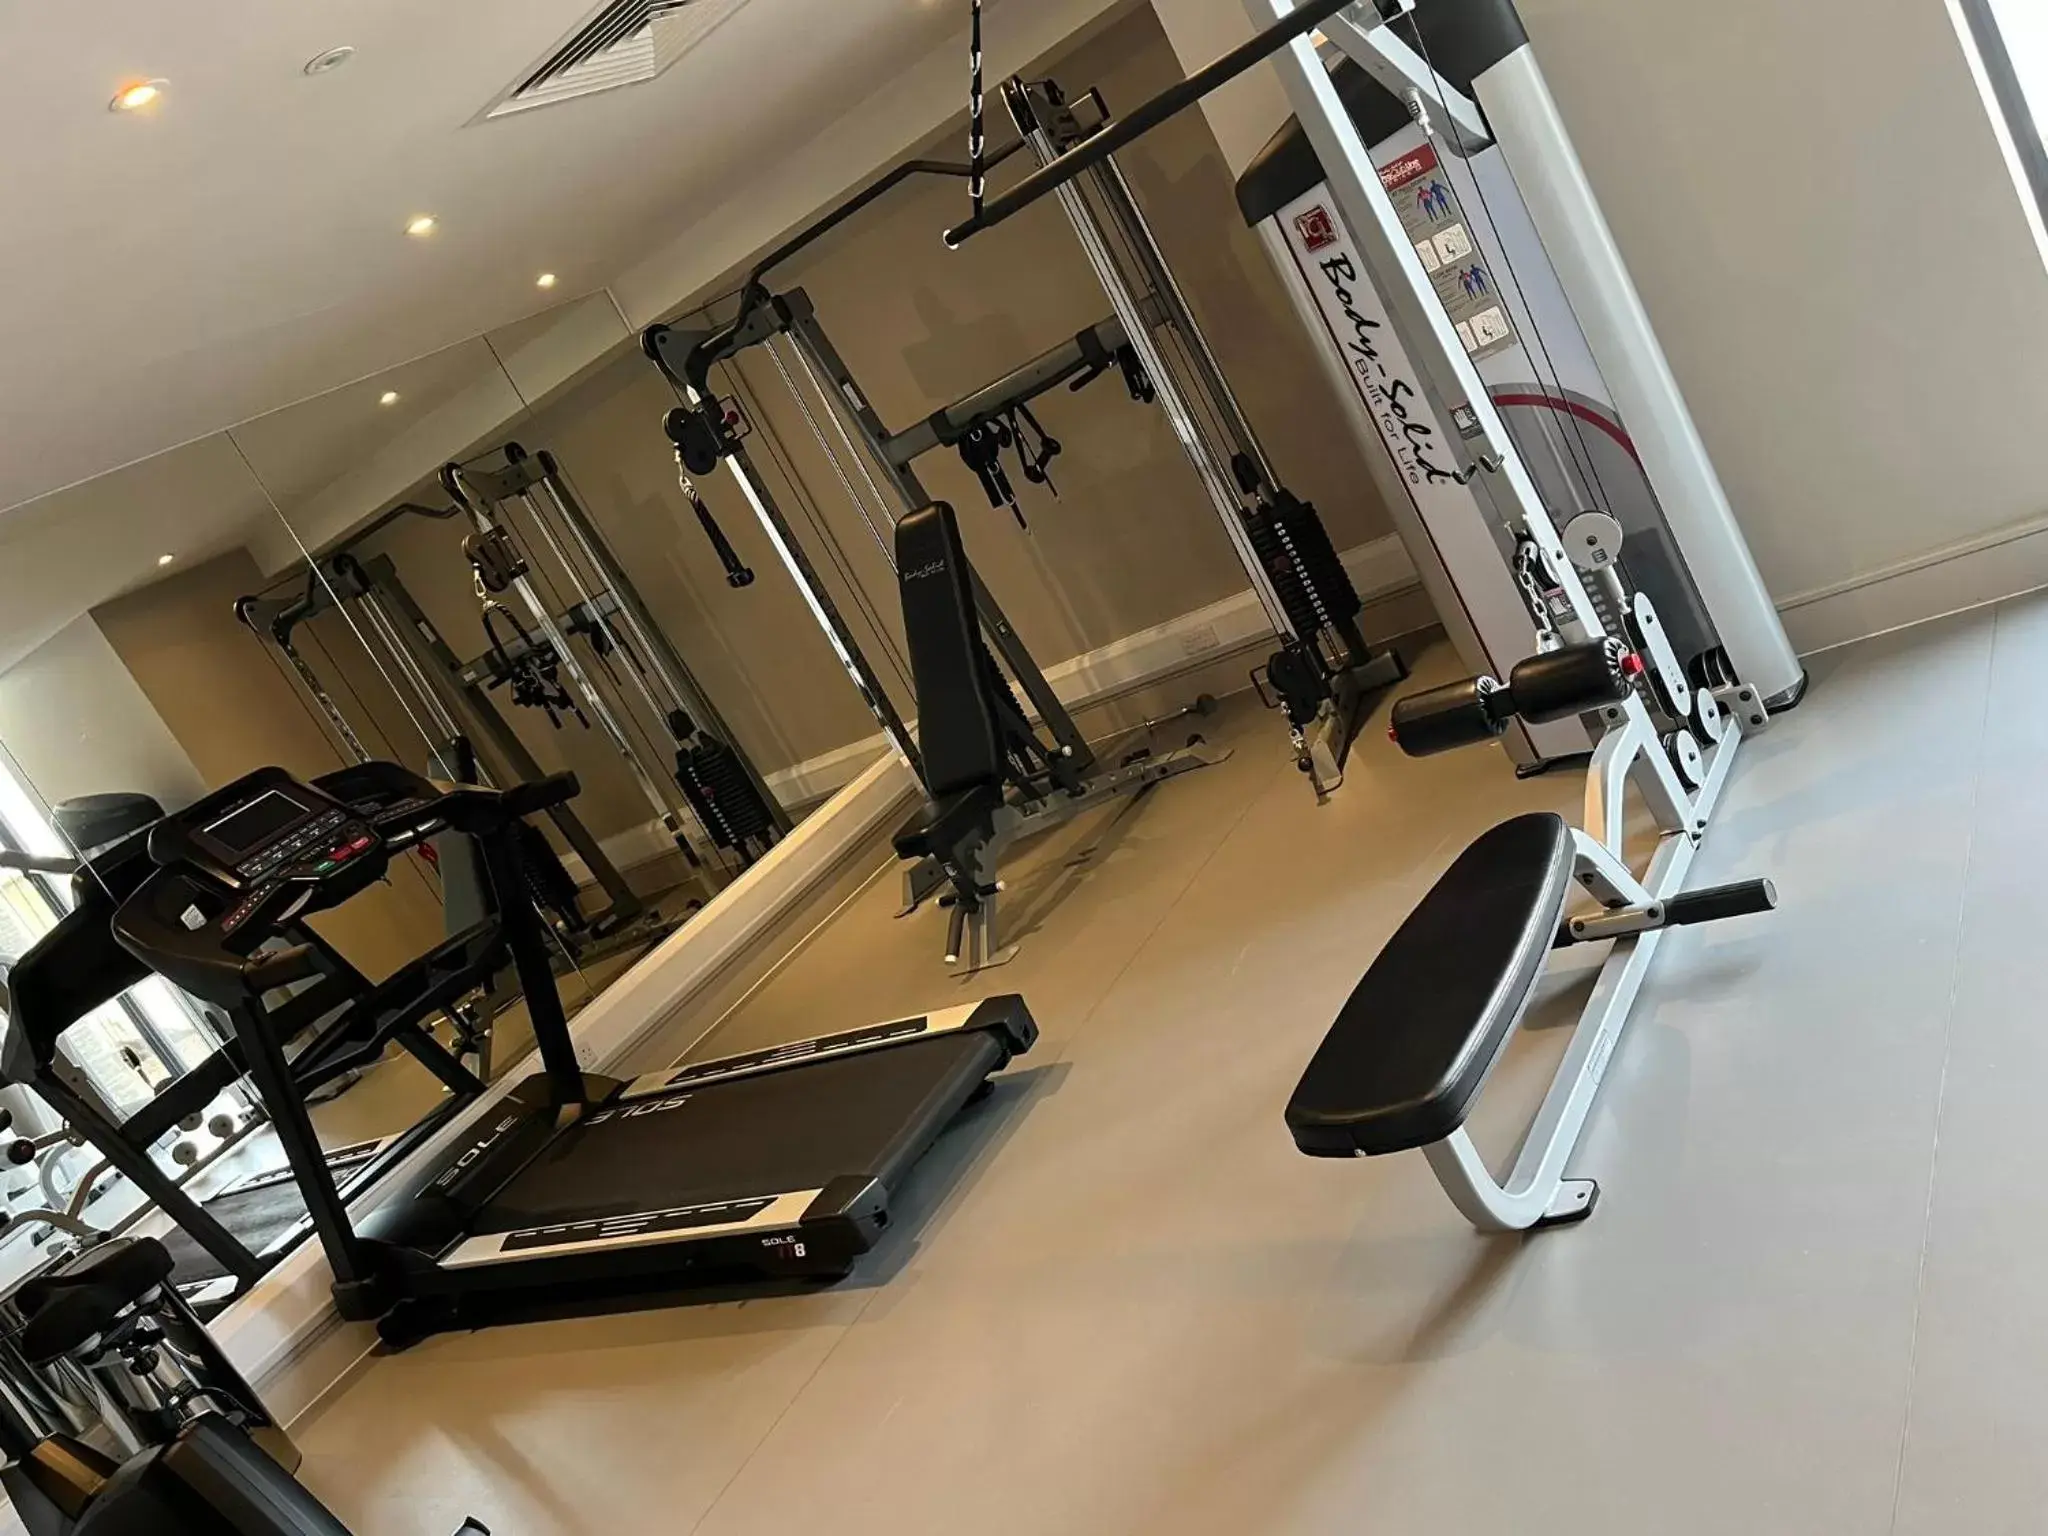 Fitness centre/facilities, Fitness Center/Facilities in Boulevard Hotel